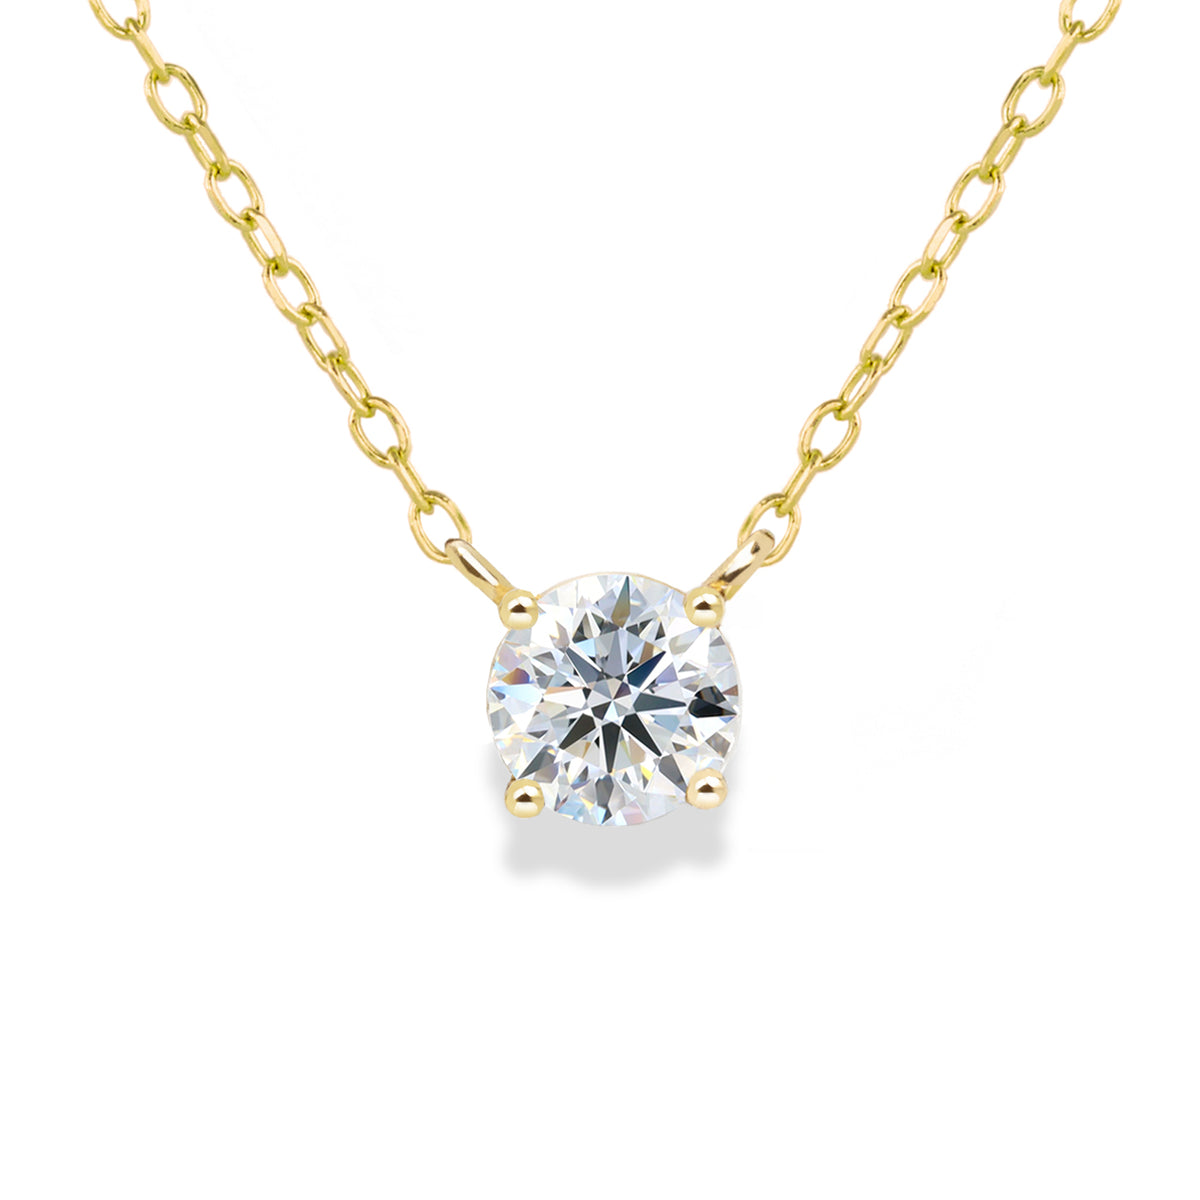 Jamie Park Jewelry - Round Diamond Solitaire Necklace This Round Diamond Solitaire Necklace features a sparkling lab diamond, set in a classic four prong design. With each diamond certified by IGI, this necklace makes for a timeless and cherished gift, perfect for any special occasion. Add a touch of elegance to any outfit with this beautiful piece. Chain length 16-18&quot;&amp;nbsp;